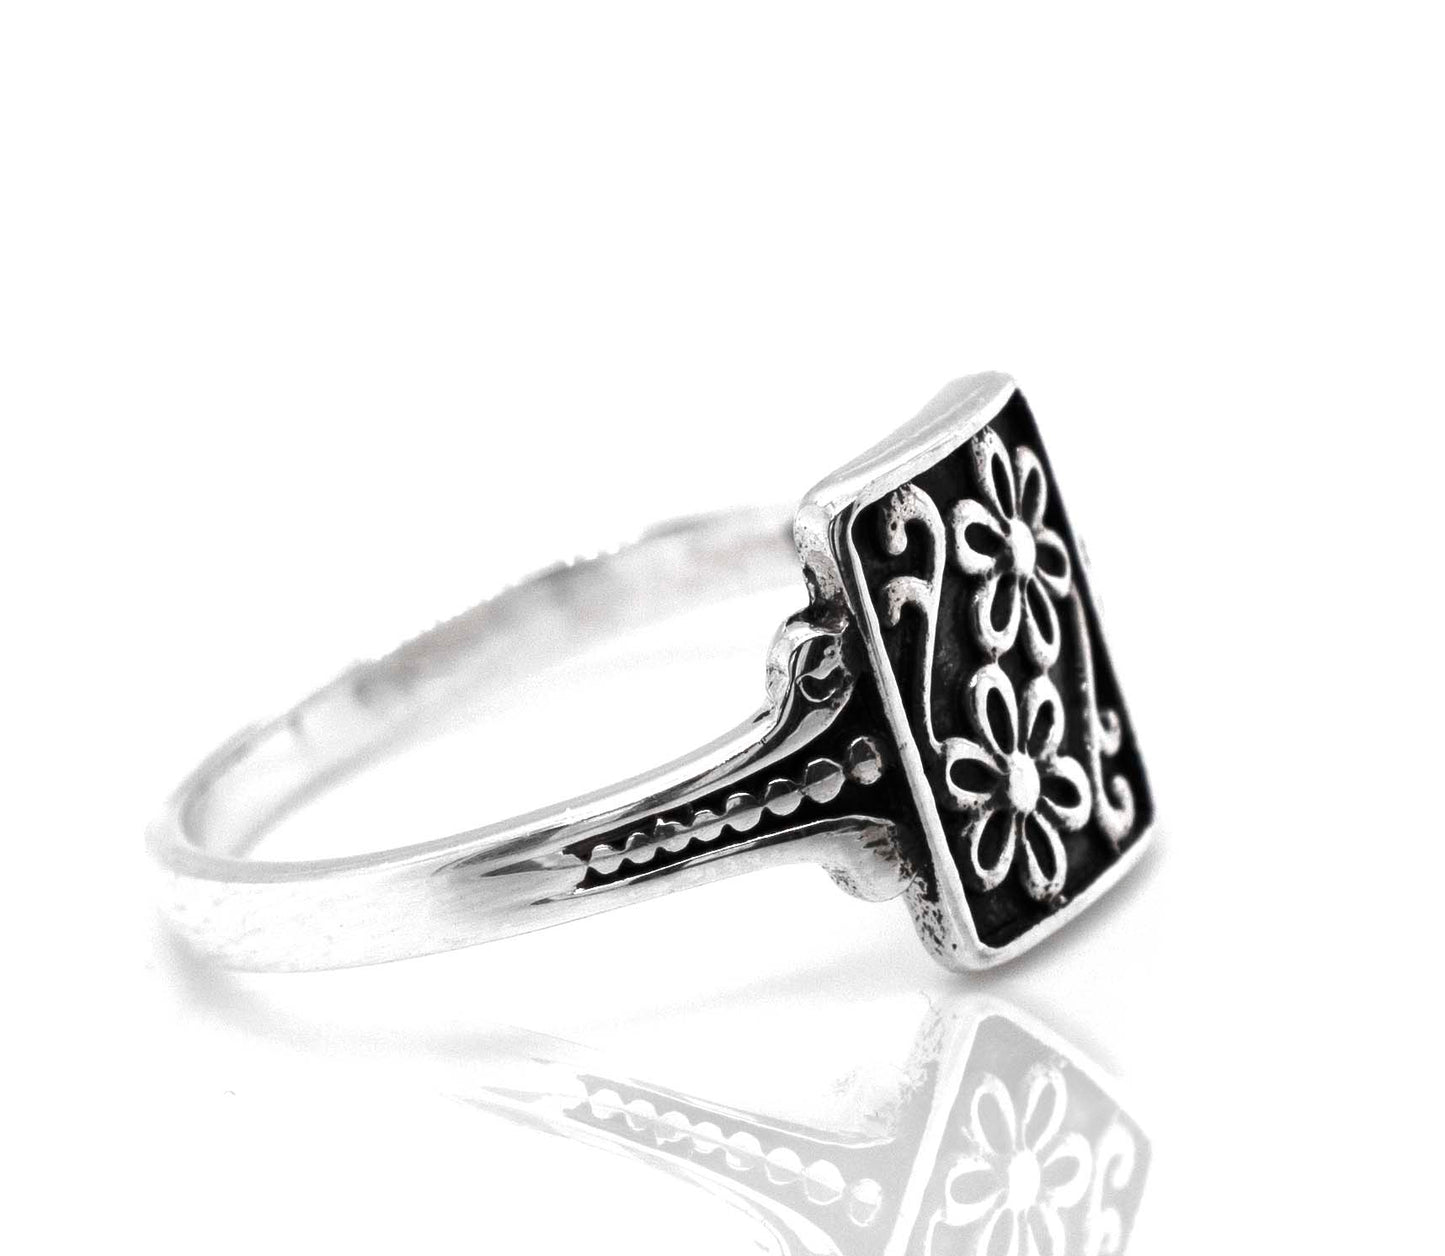 A Shield With Flower Pattern Ring made of sterling silver.